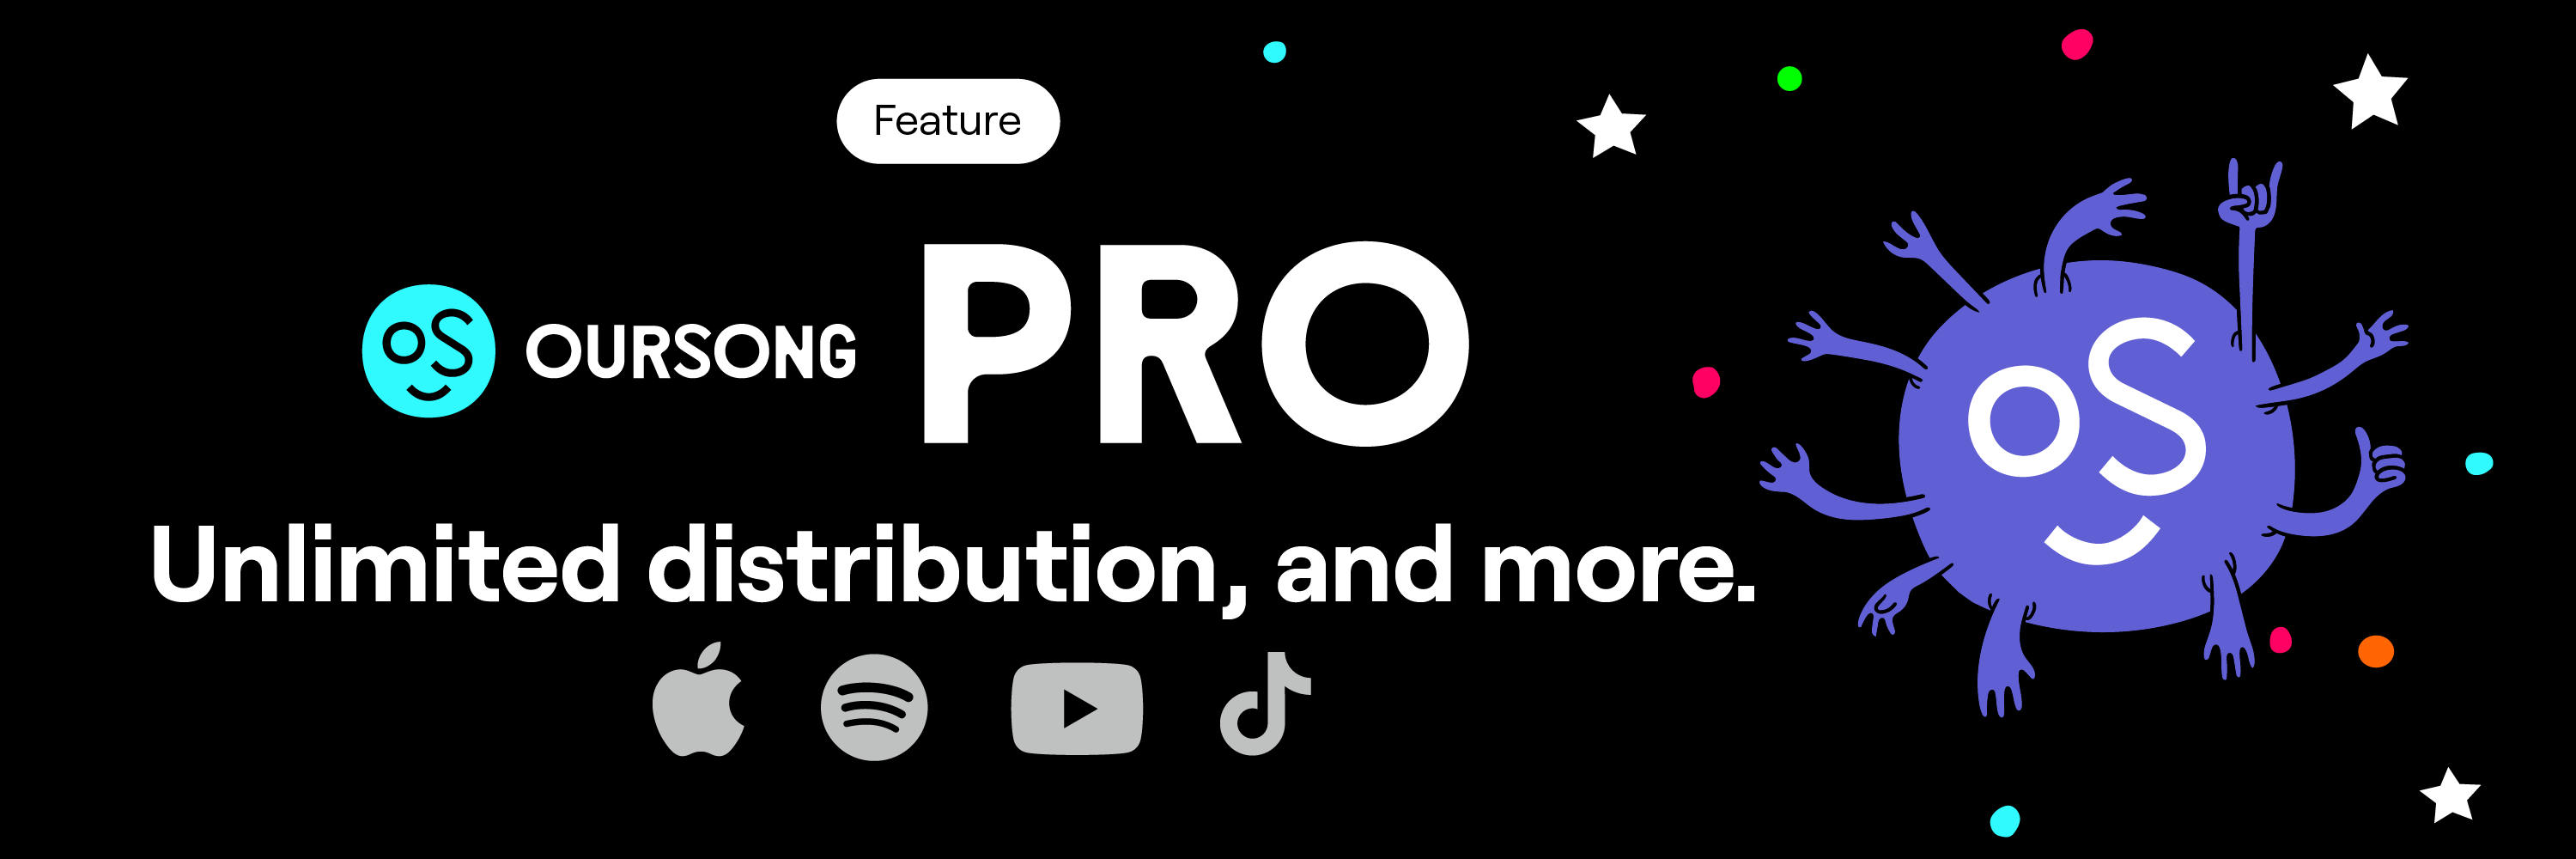 Feature: OurSong Pro